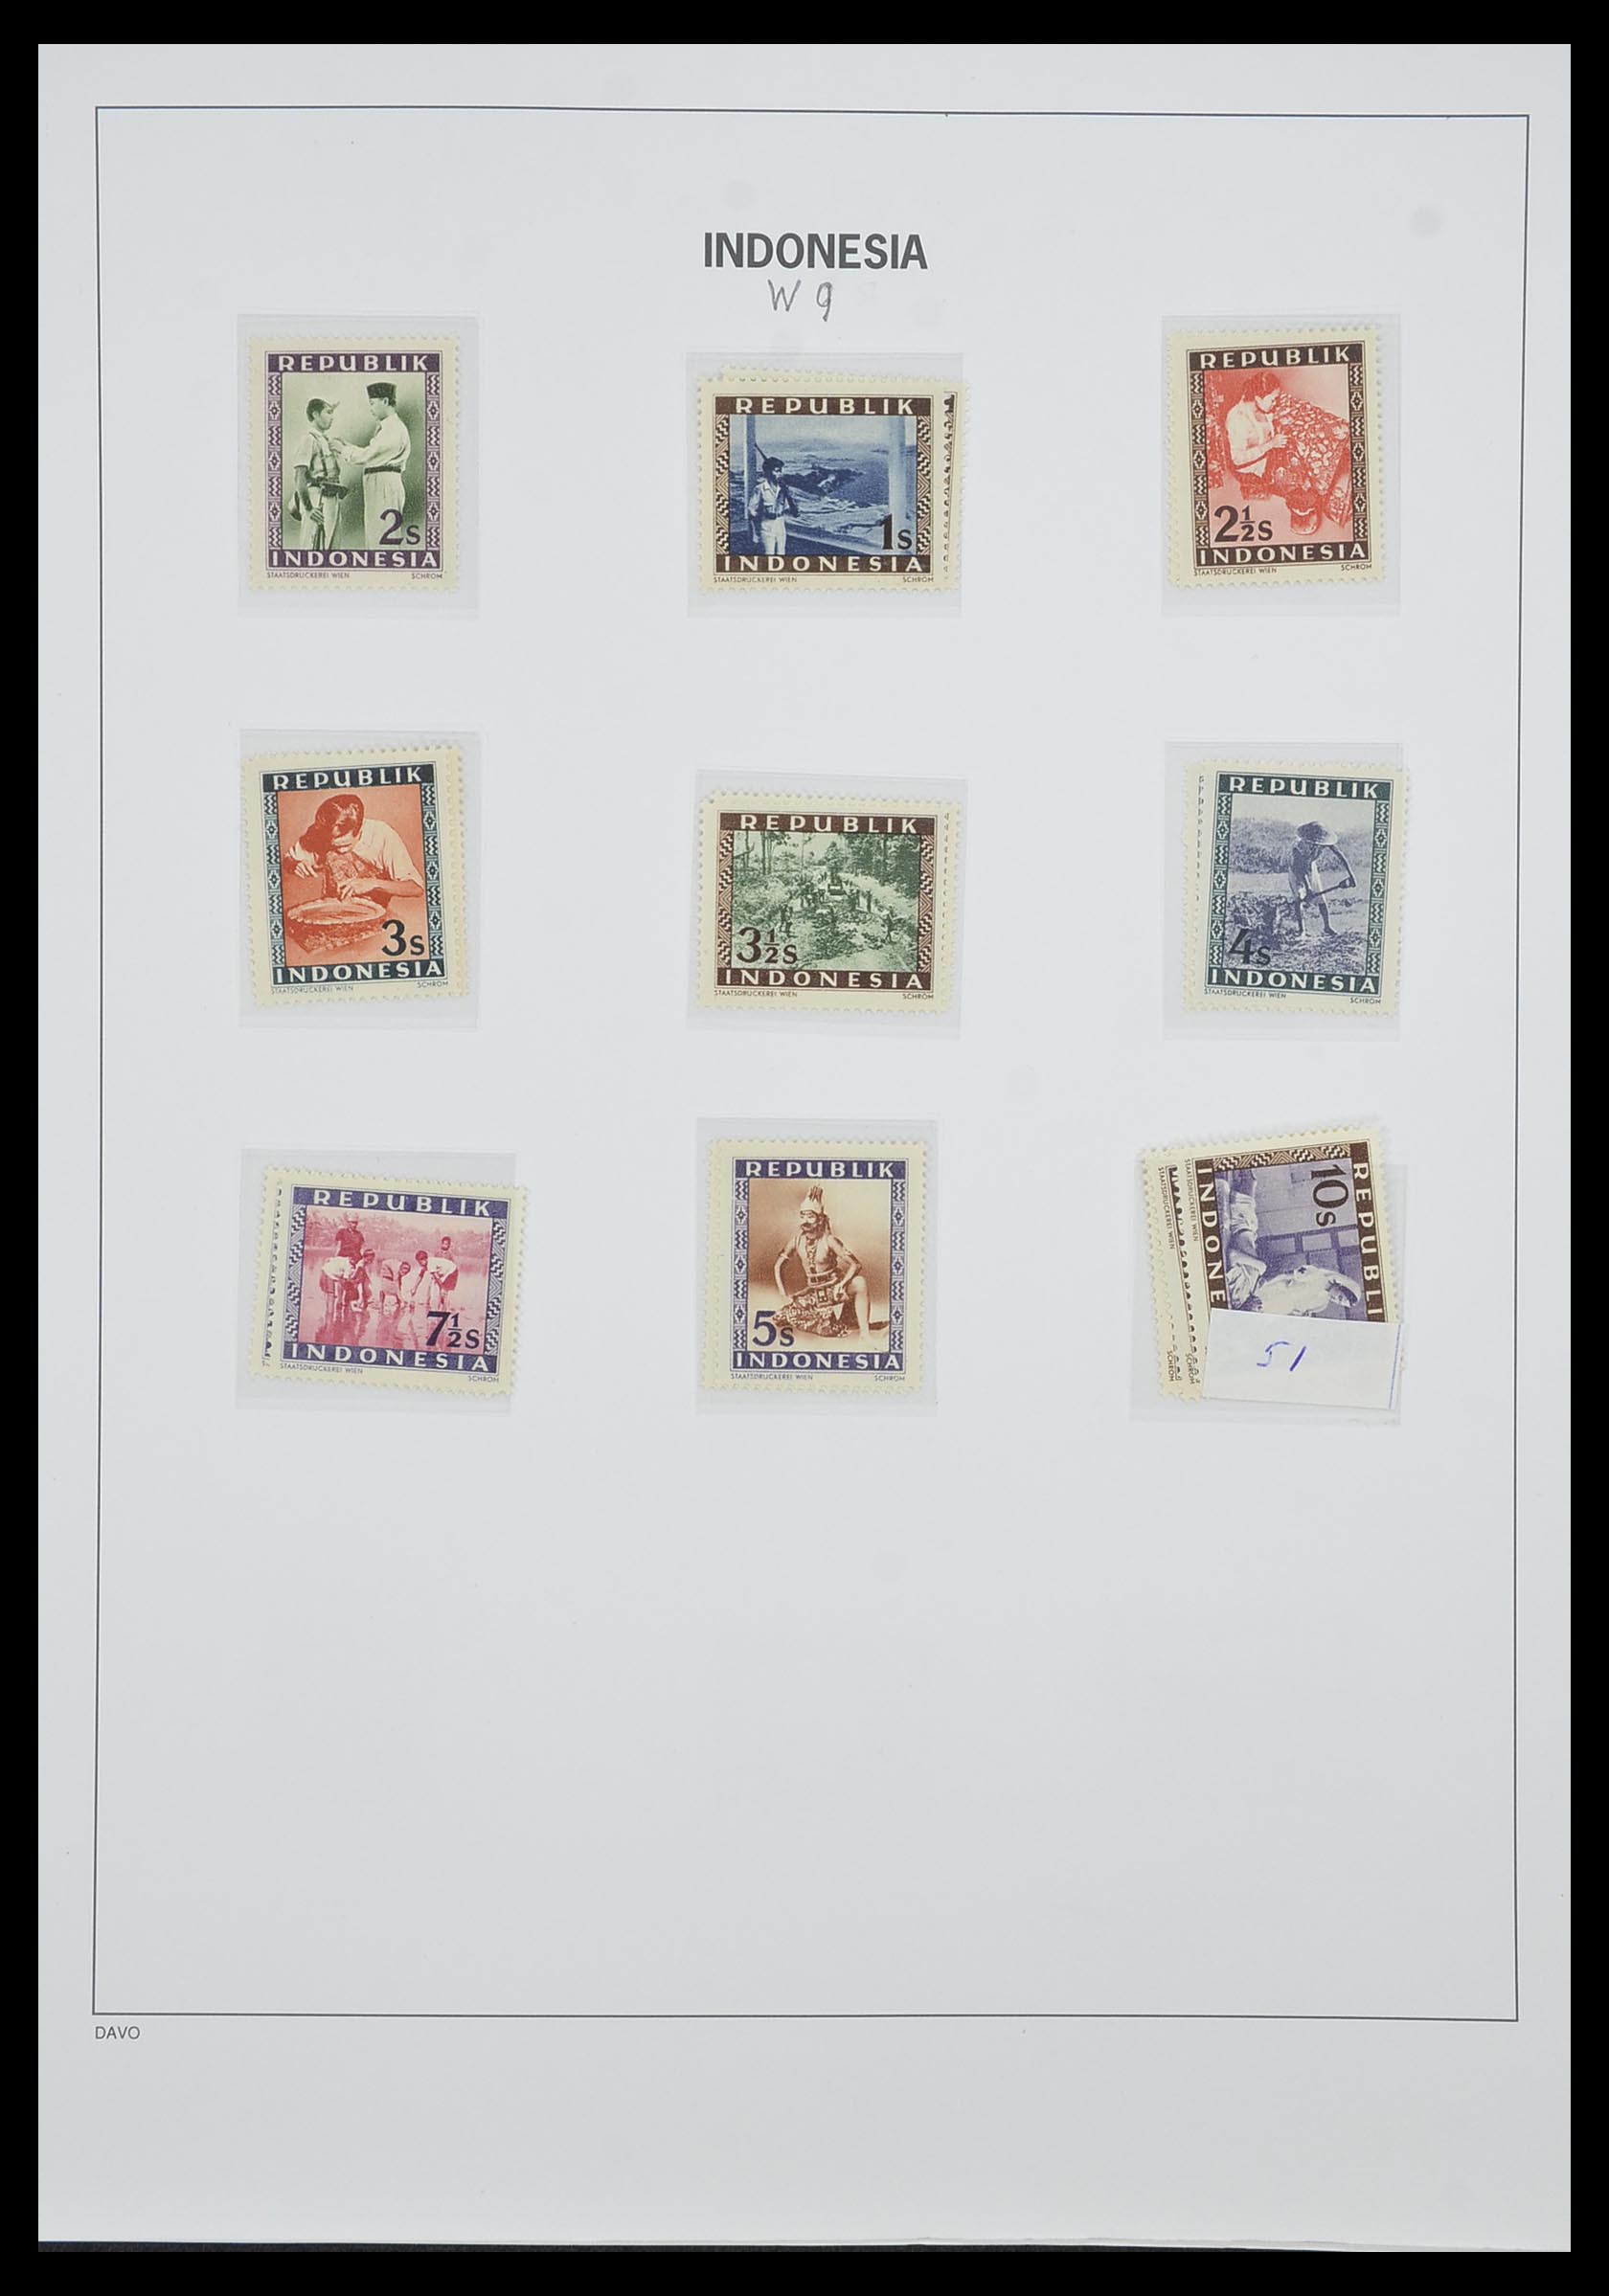 33988 018 - Stamp collection 33988 Vienna printings Indonesia.